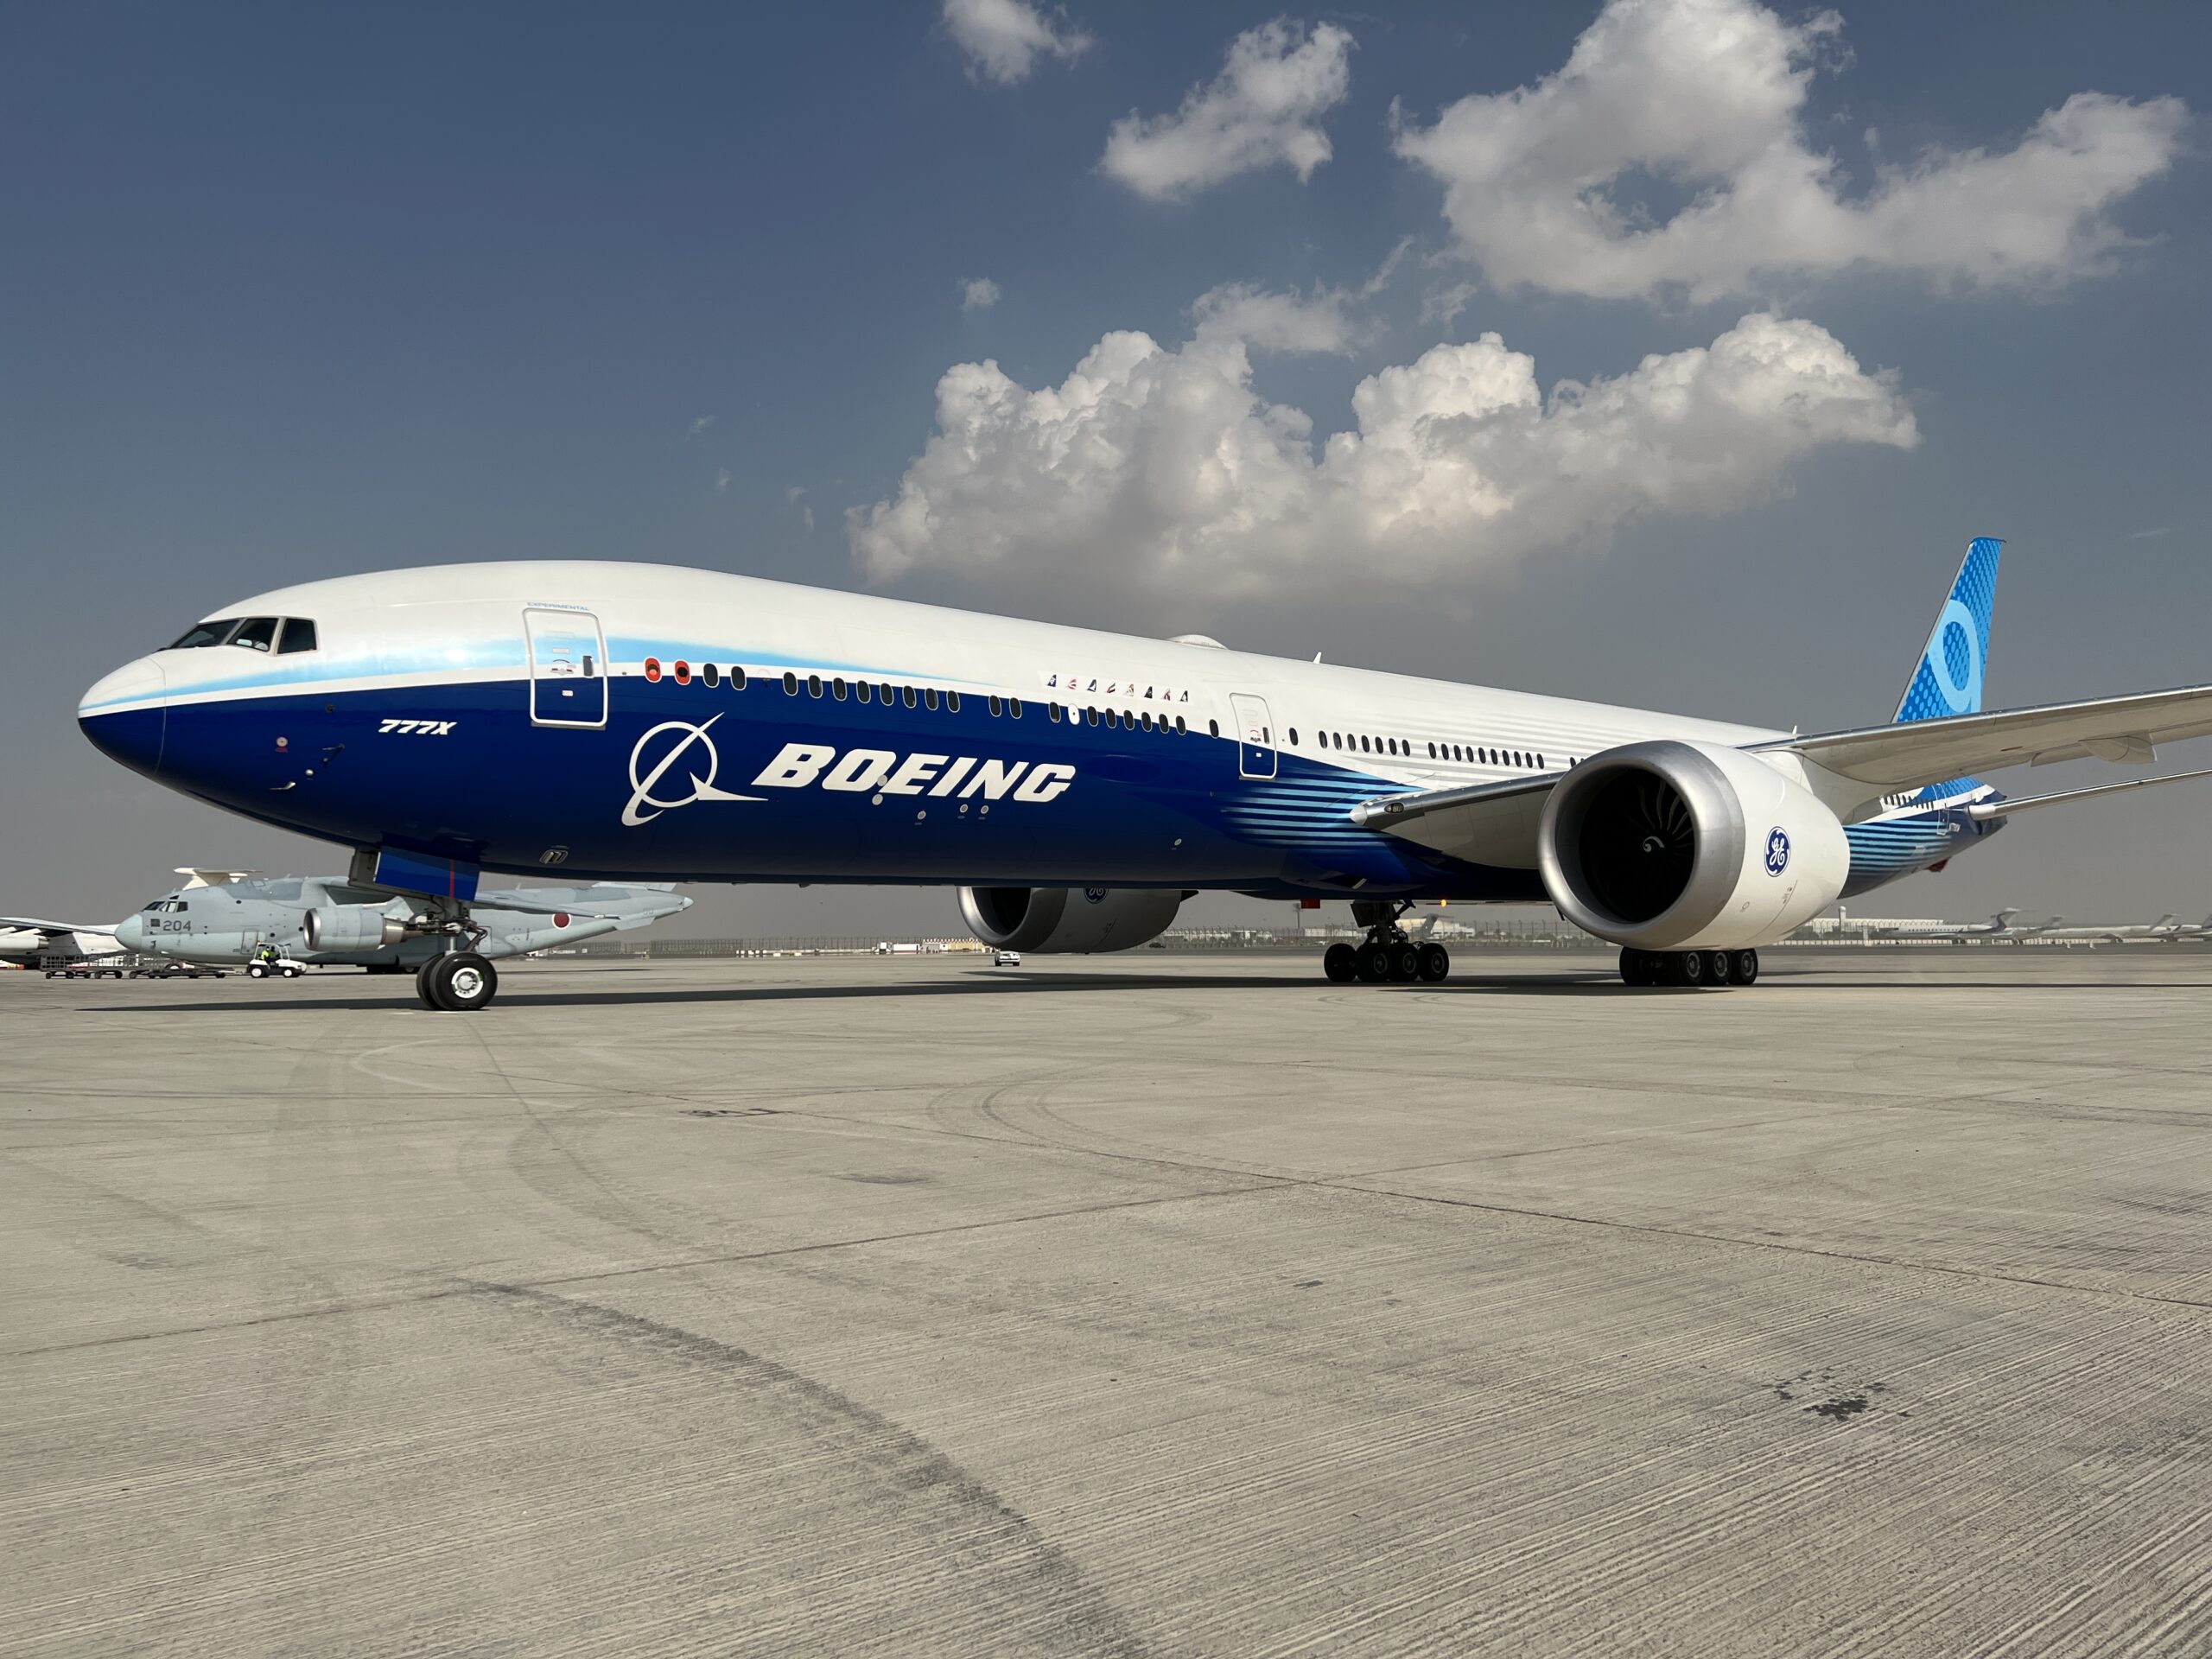 Dubai Airshow 2021: Boeing Orders and Announcements